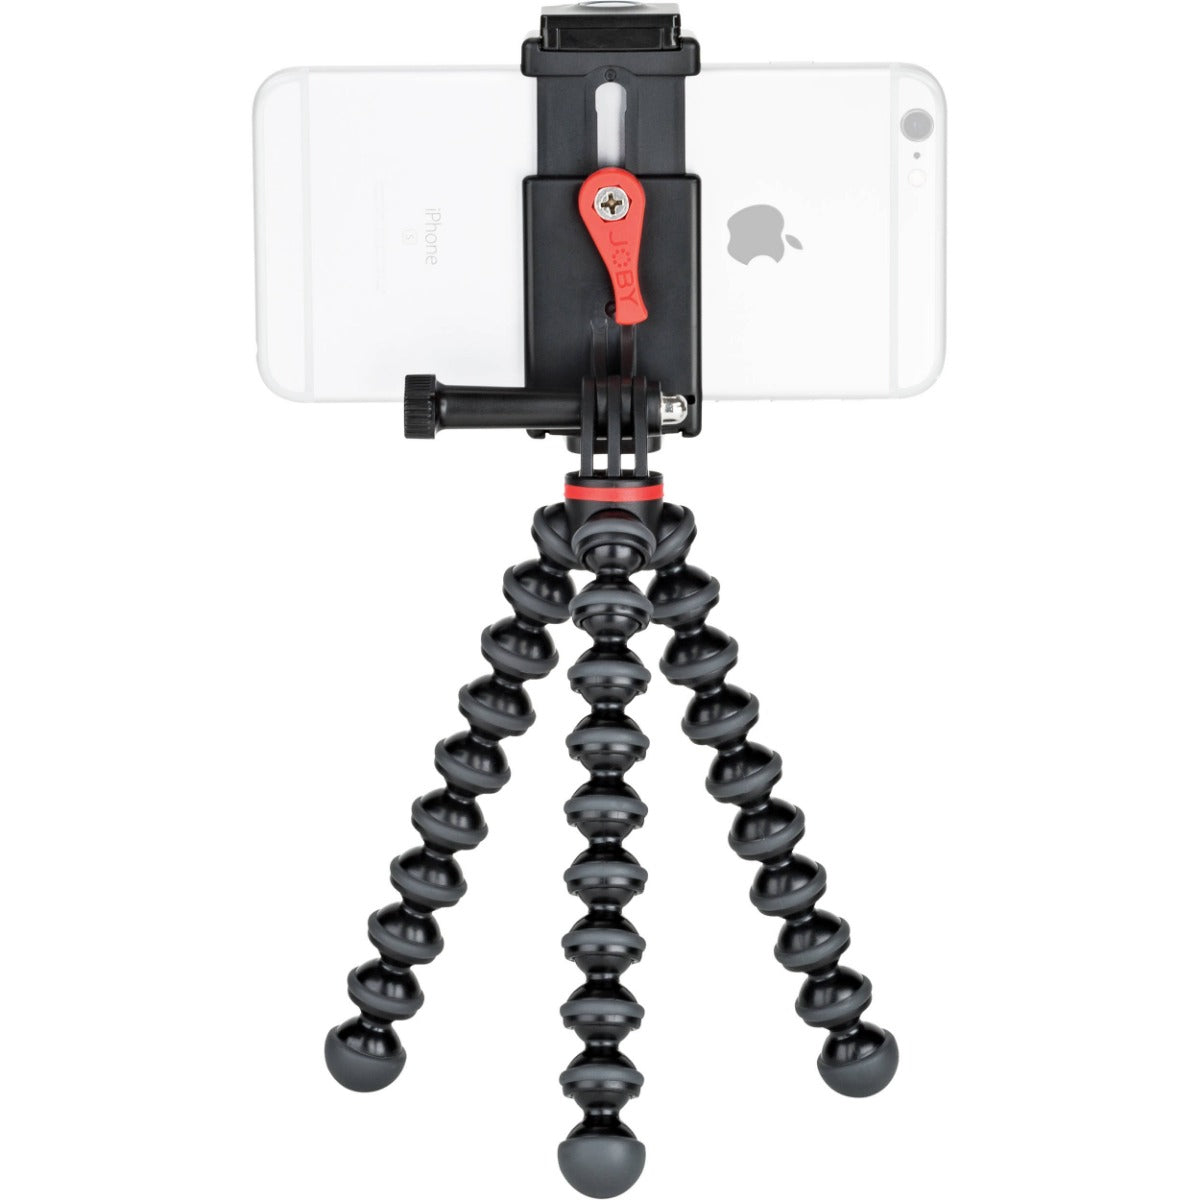 Product Image of JOBY GripTight GorillaPod Action Mini Tripod Stand with Mount for Smartphones Kit